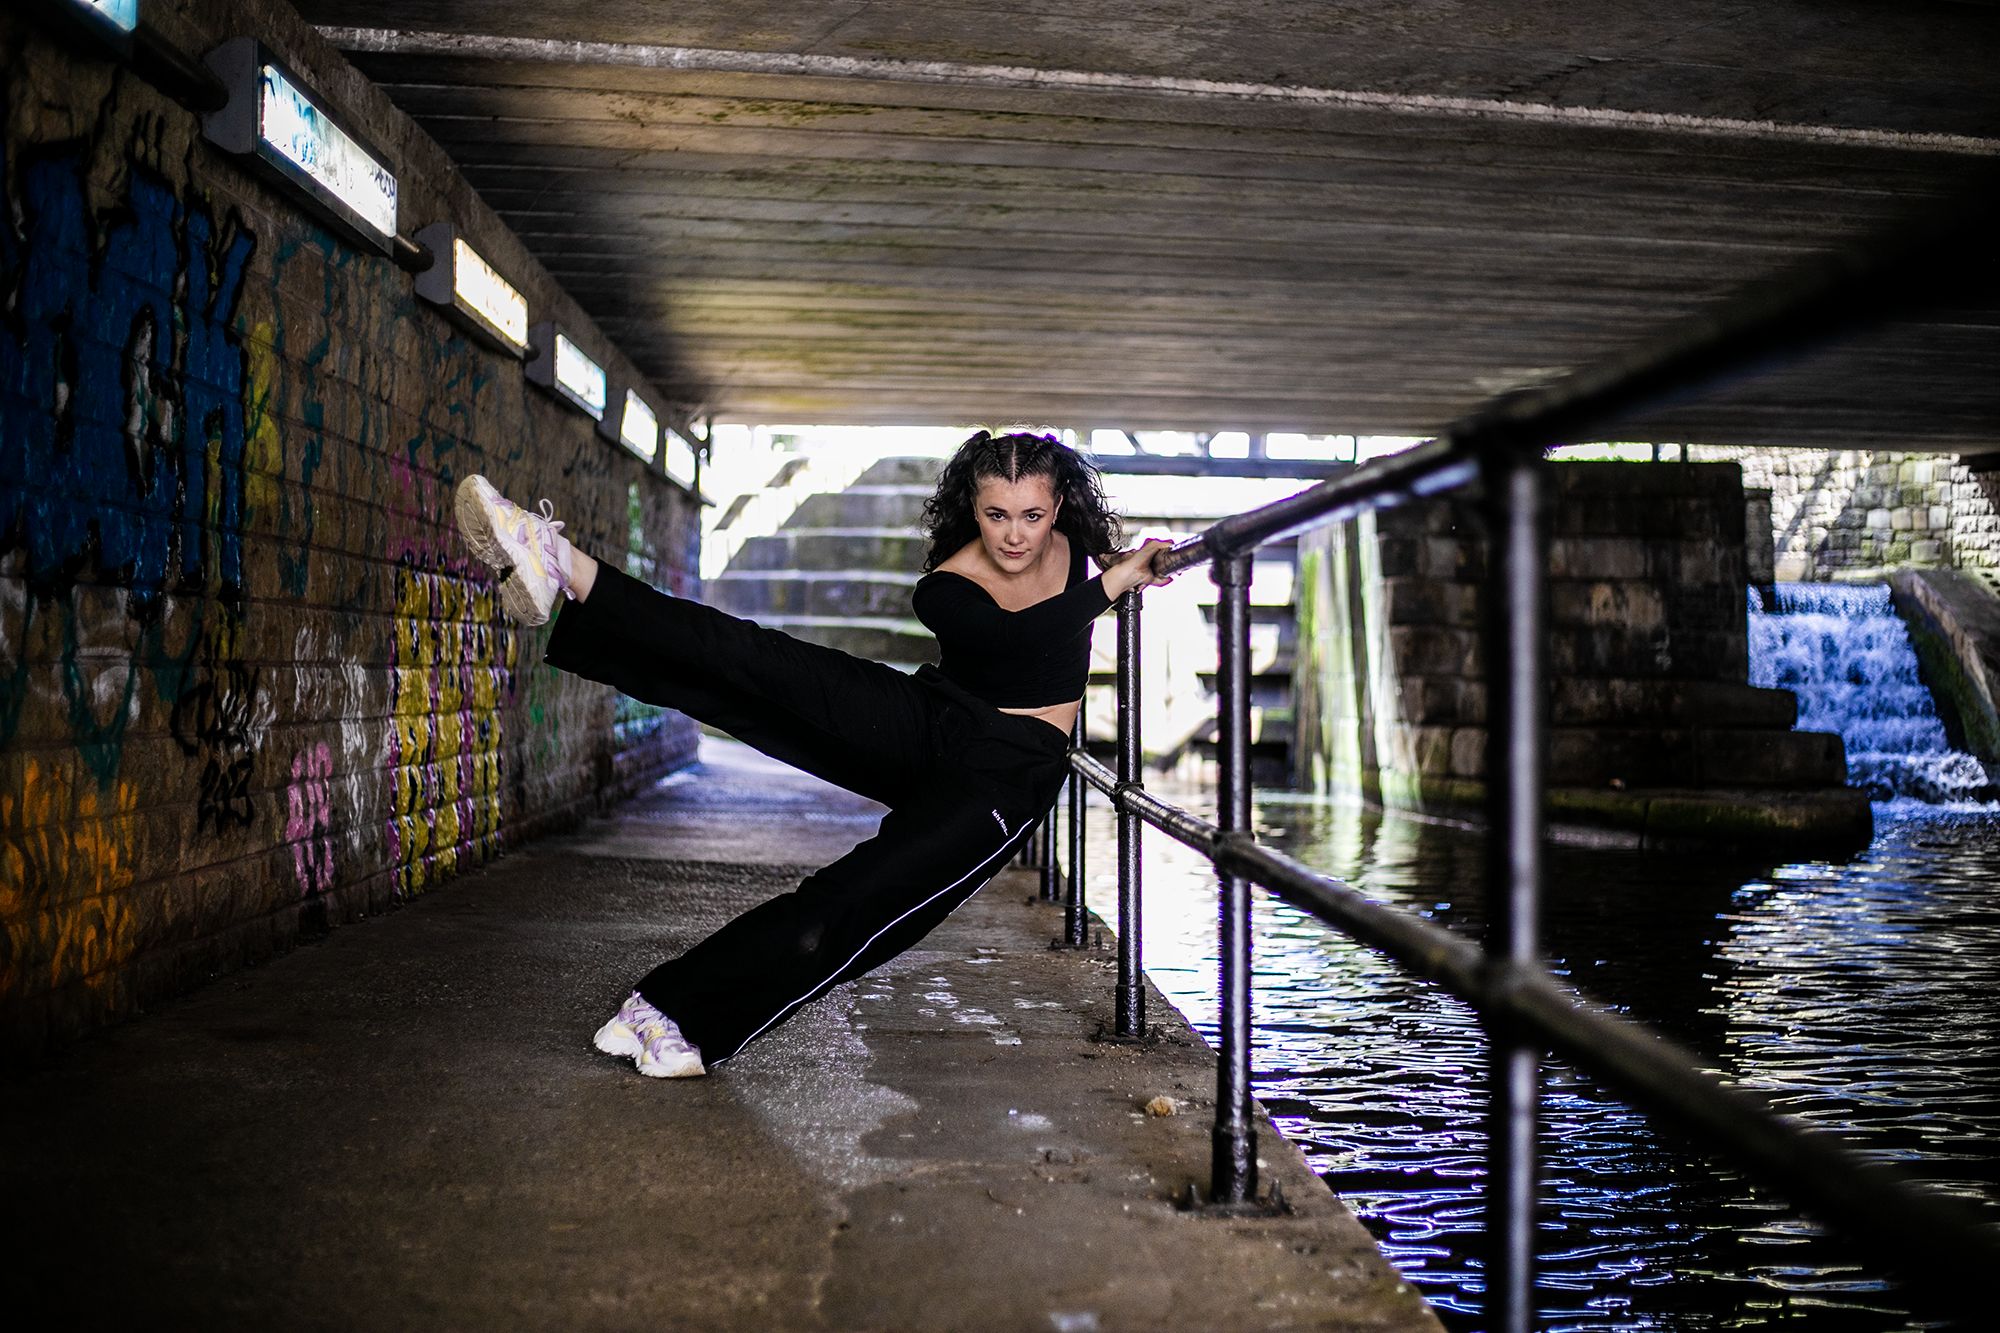 white female dancer with brown curly hair leaning on a raining undernieth a tunnel with water to the right side of the image. wearing blacktracksuit and white trainers